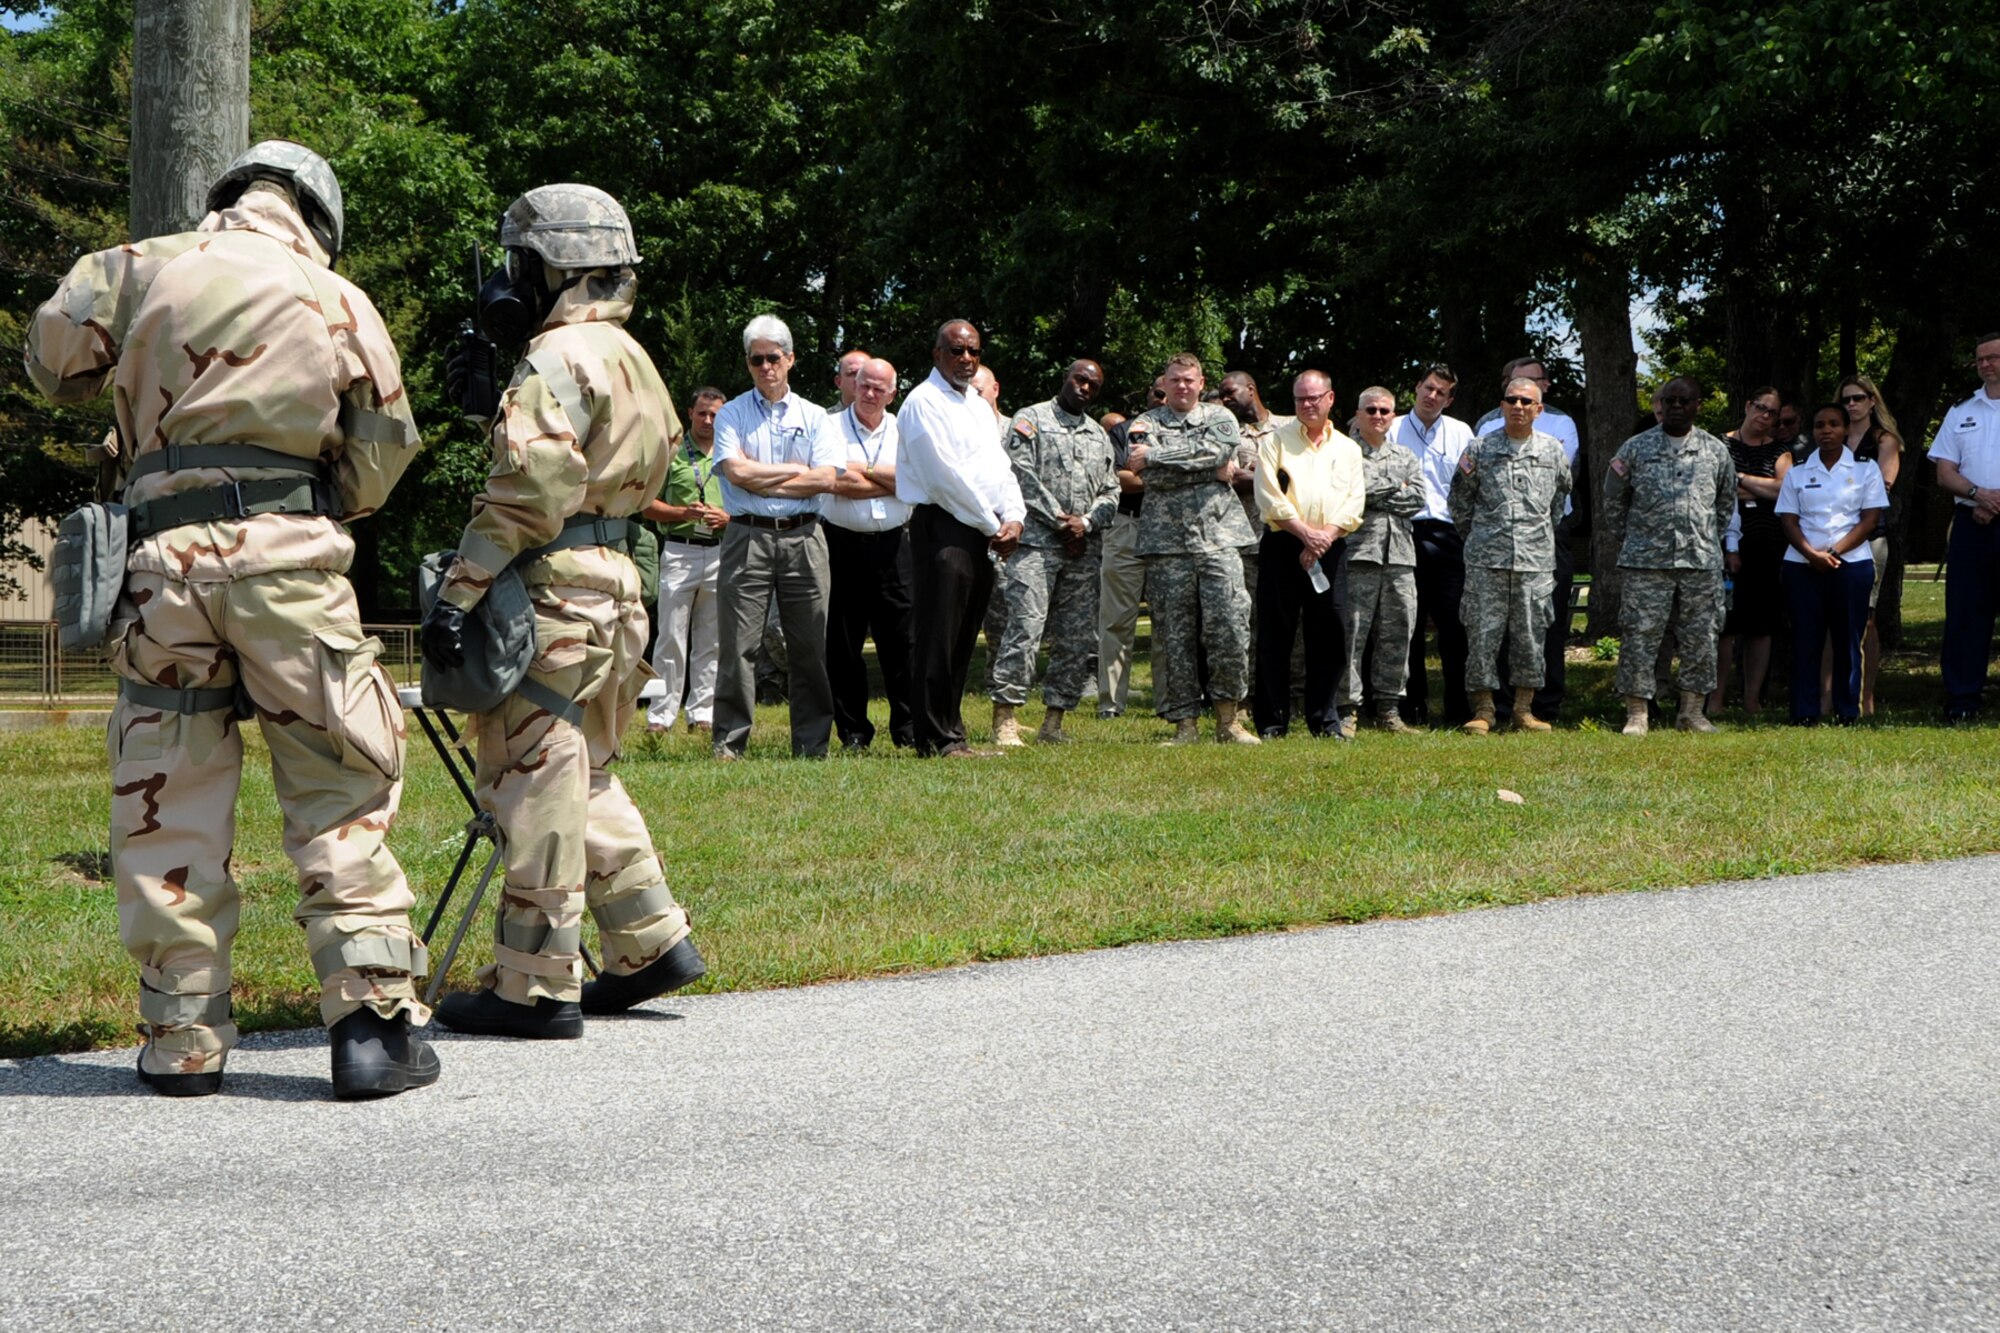 Attendees watch Airmen conduct CBRN reconnaissance during the Air Force Chemical, Biological, Radiological and Nuclear Defense Demonstration Day on Joint Base Andrews, Md., Aug. 5, 2015. The event gave an overview of Air Force CBRN defense capabilities to Office of the Secretary of Defense and joint leaders who directly influence DoD investment decisions in new CBRN defense technologies. (U.S. Air Force photo/Staff Sgt. Matt Davis)